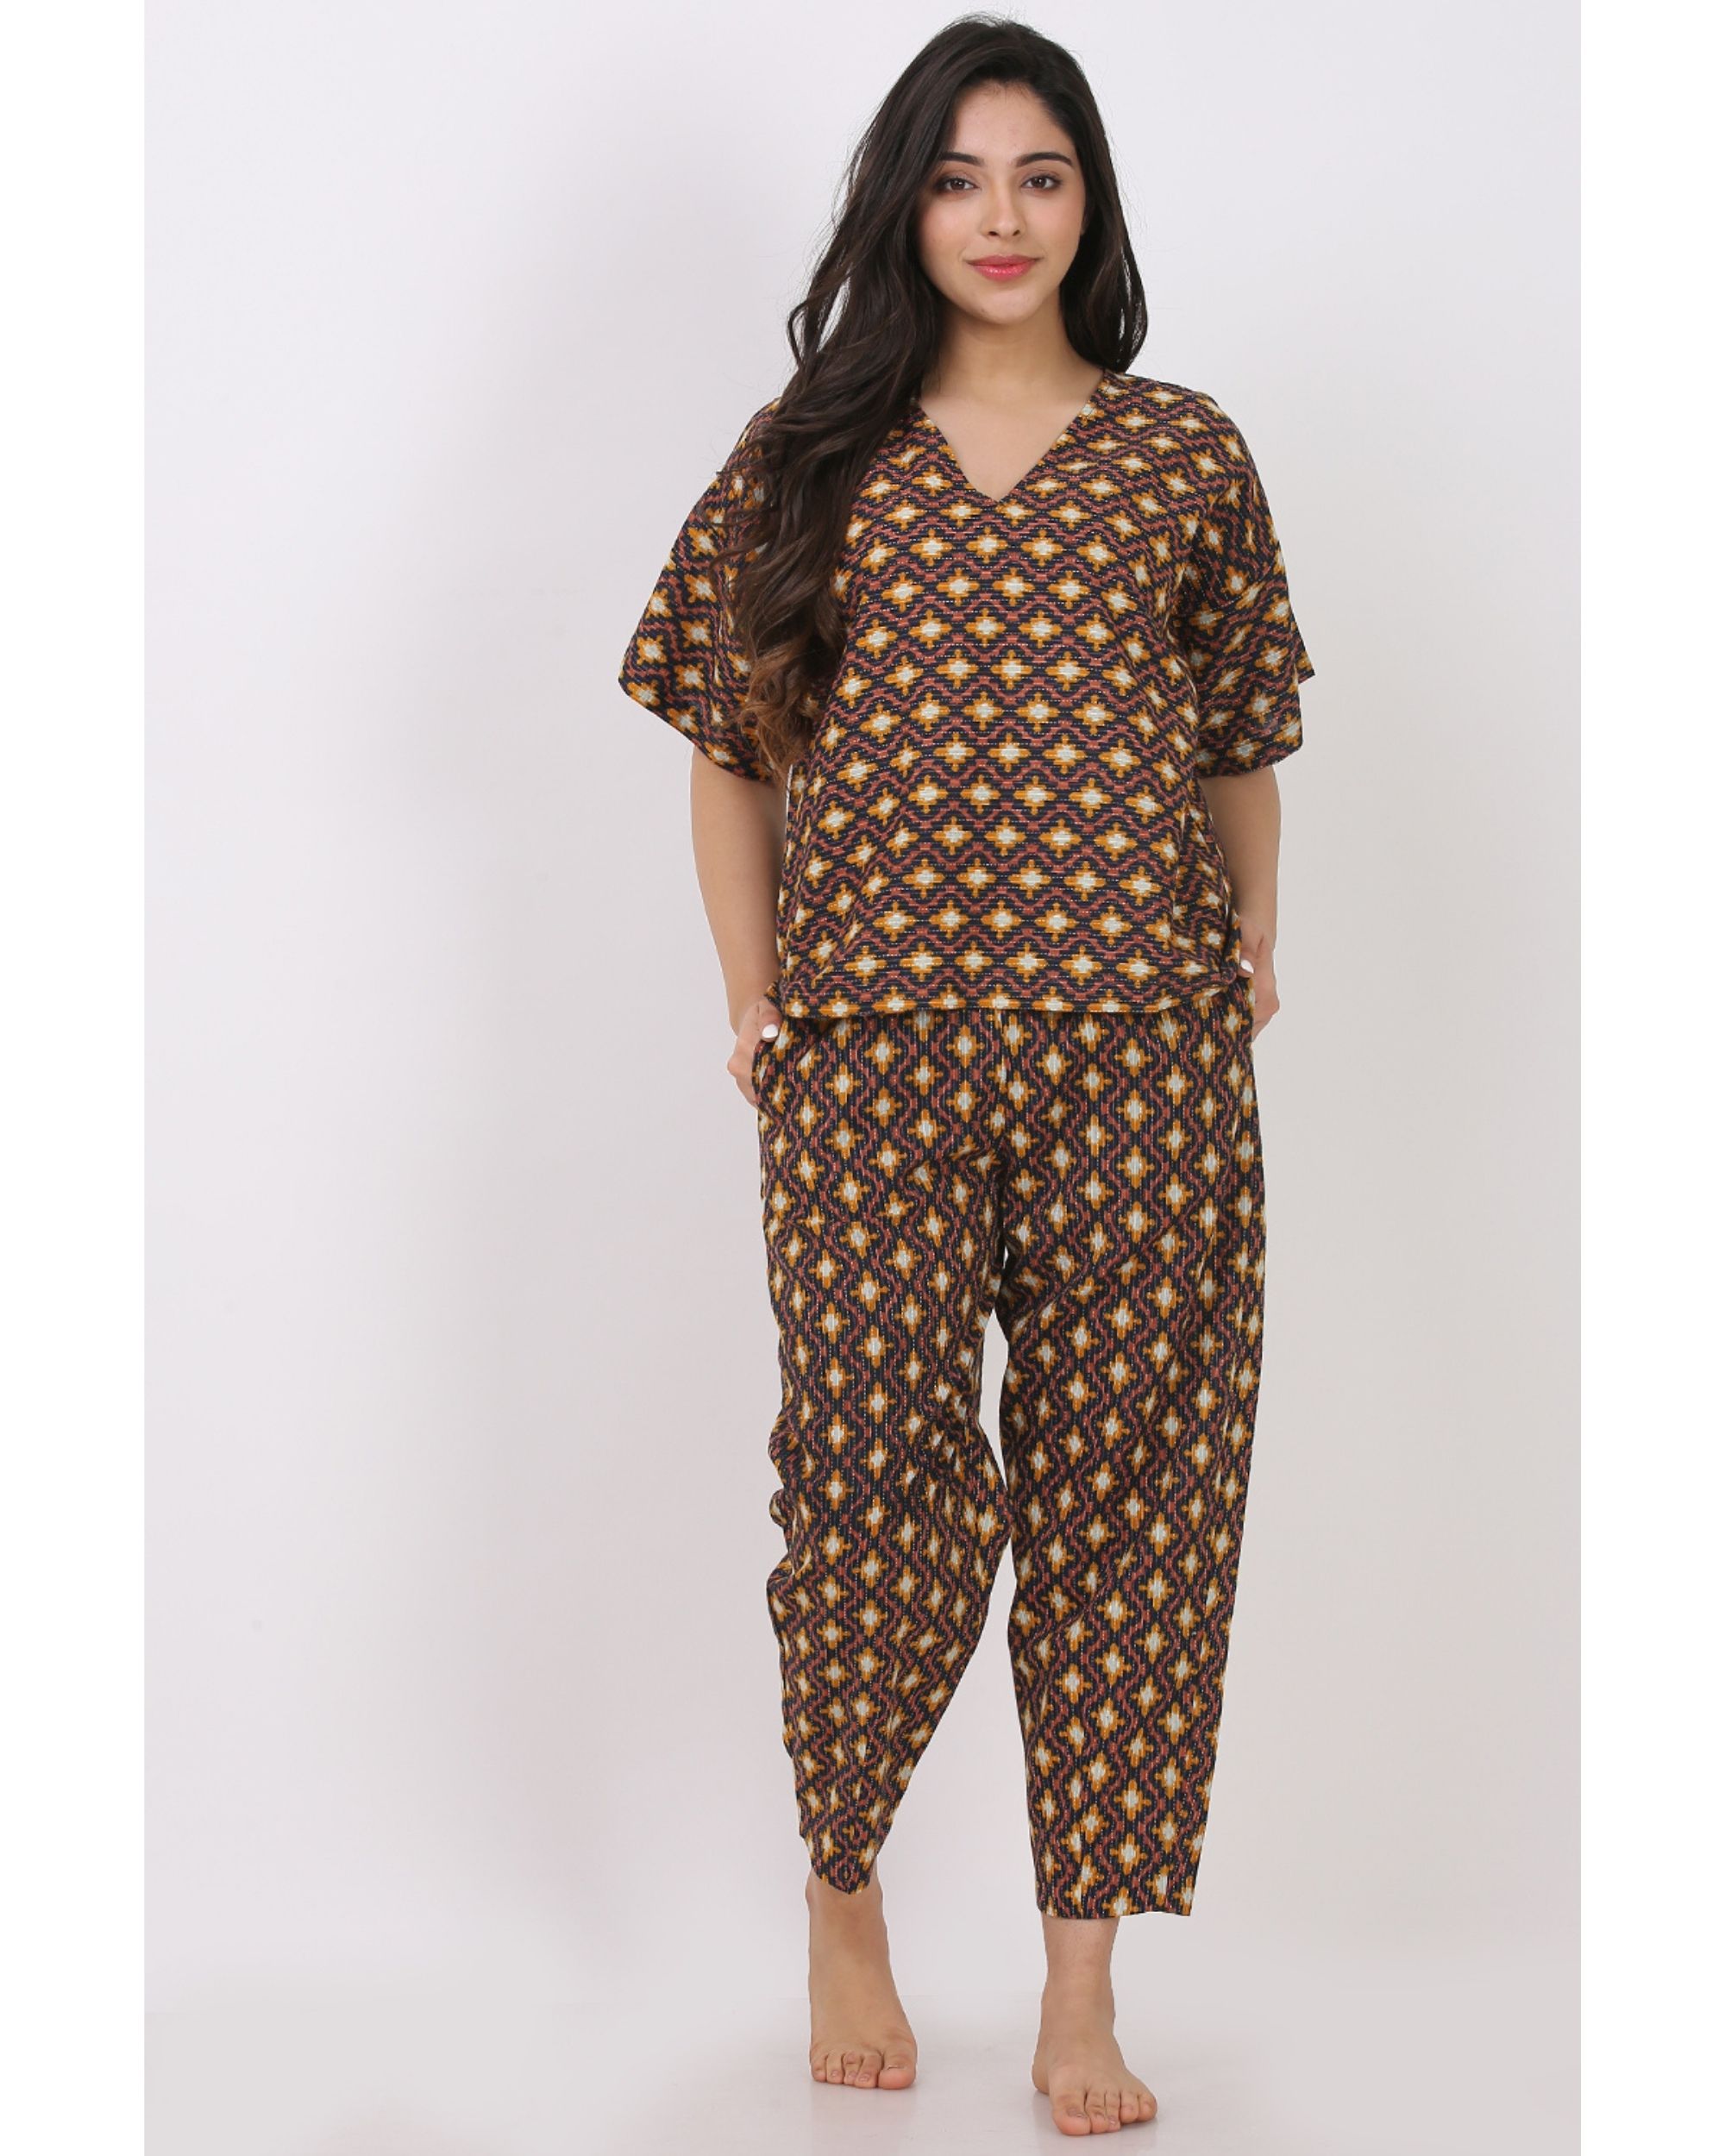 Mustard geometric printed top with pants - set of two